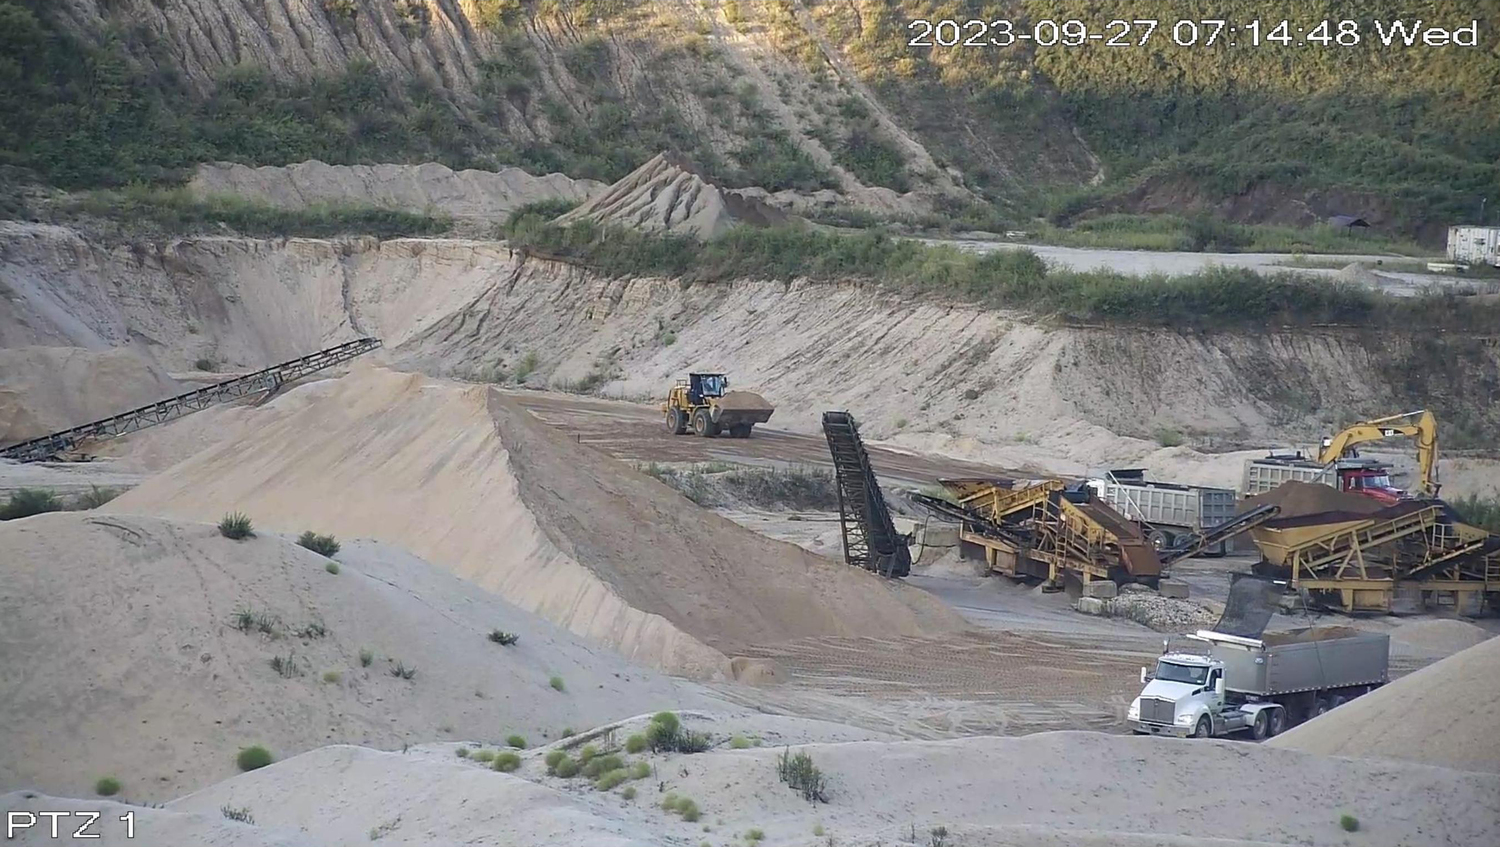 Photographs from a neighboring property show mining activity continuing at the Sand Land mine in Noyac after court orders requiring it to stop.